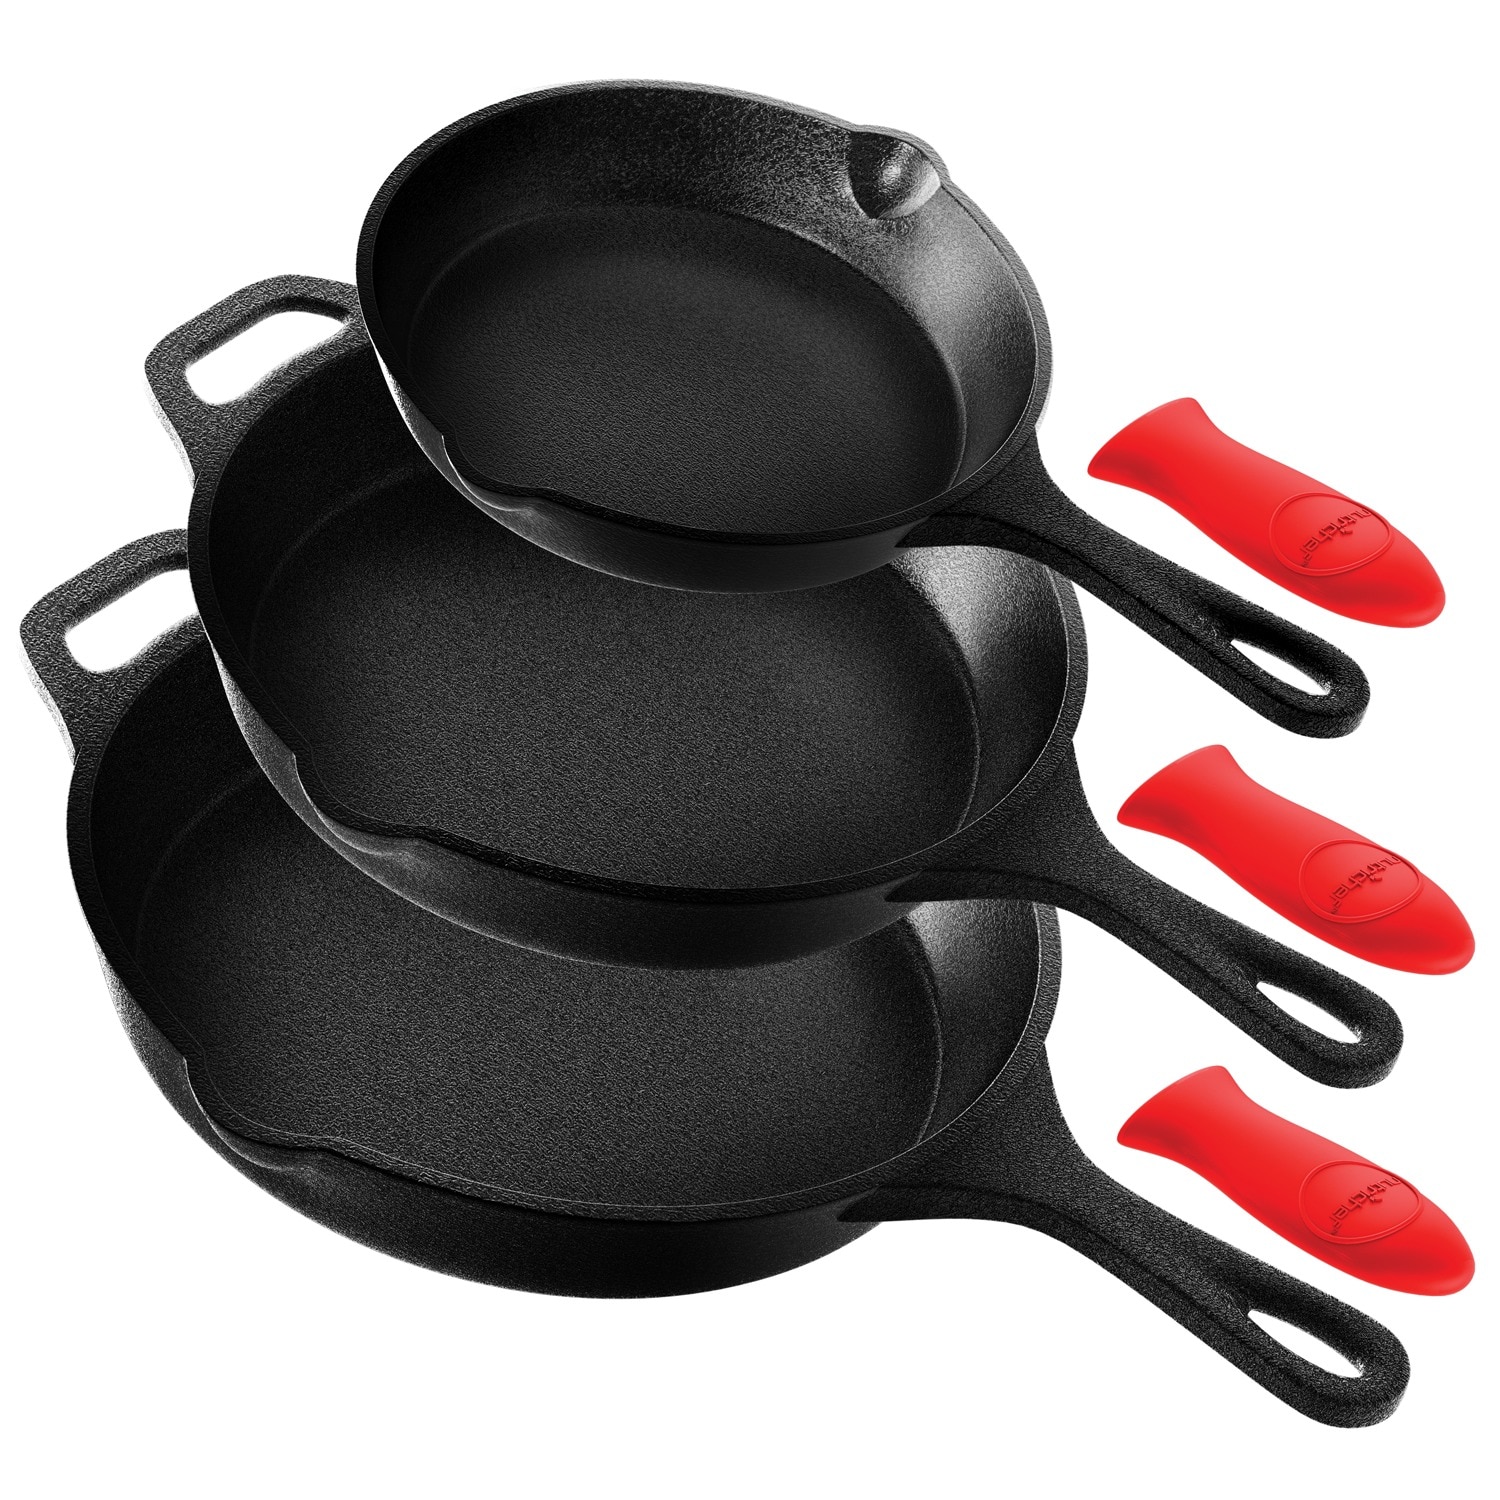 MegaChef Pre-Seasoned 9 Piece Cast Iron Skillet Set with Lids and Red  Silicone Holder 